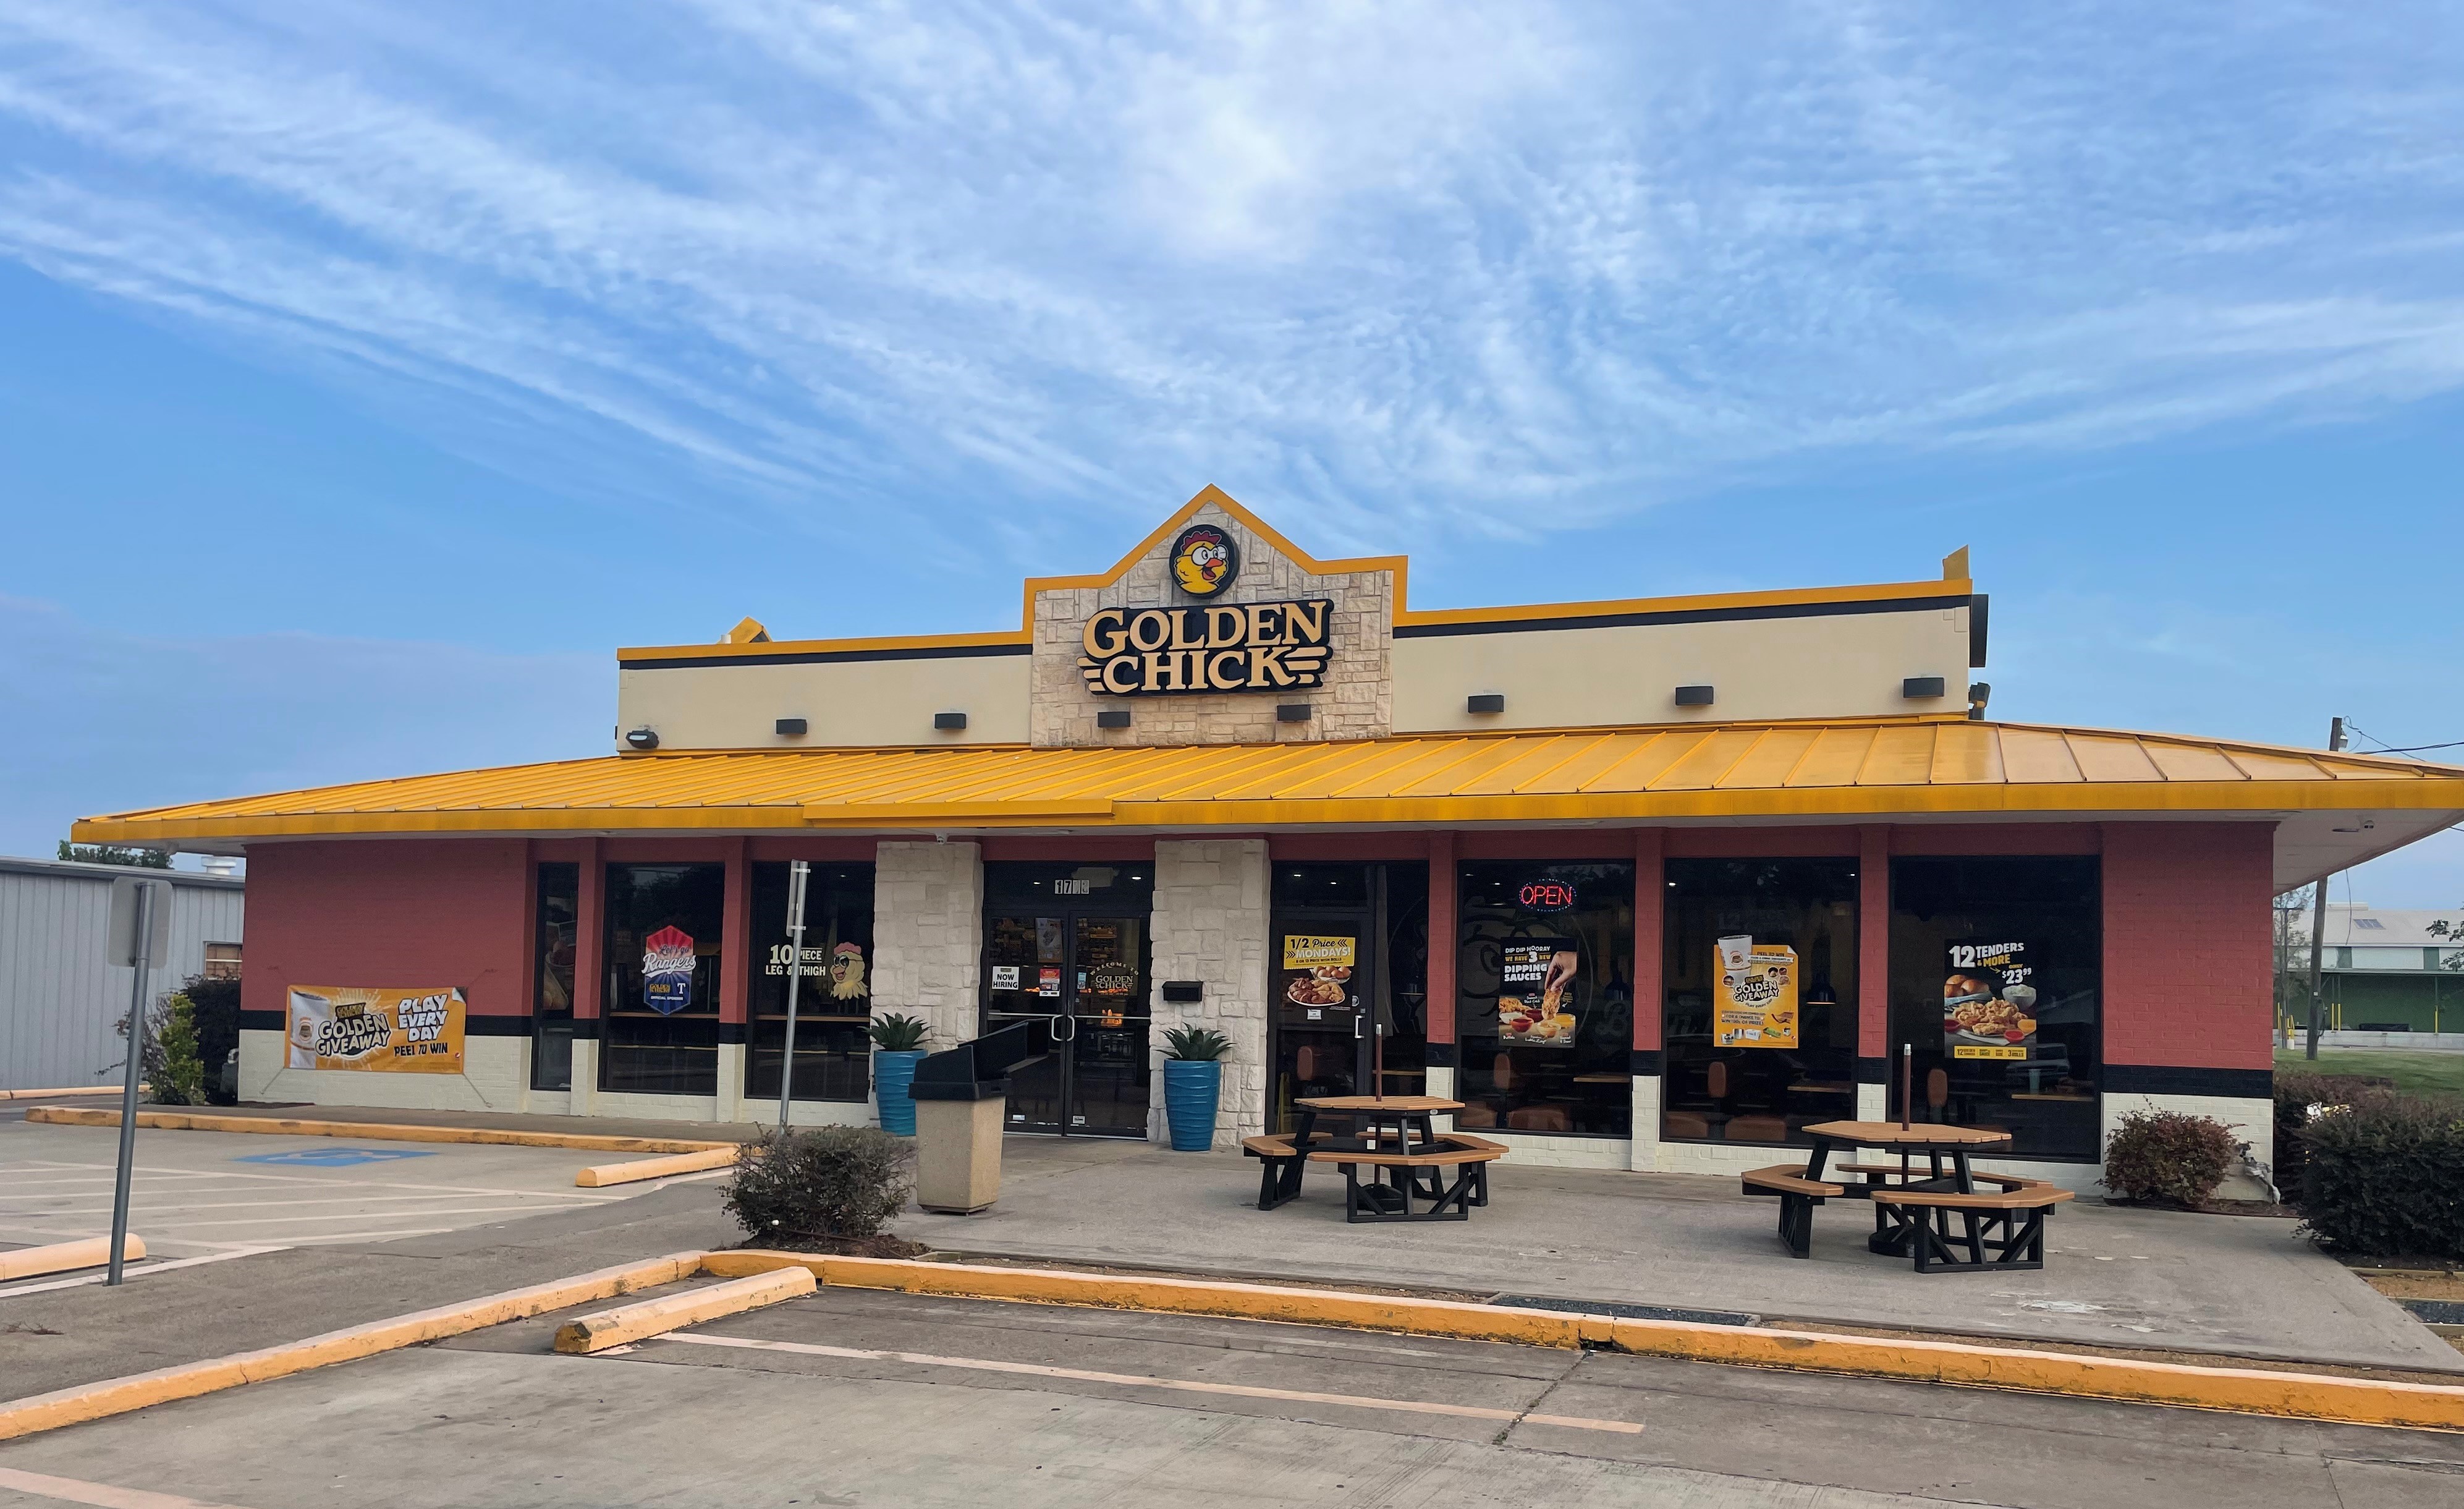 Golden Chick storefront.  Your local Golden Chick fast food restaurant in Plano, Texas